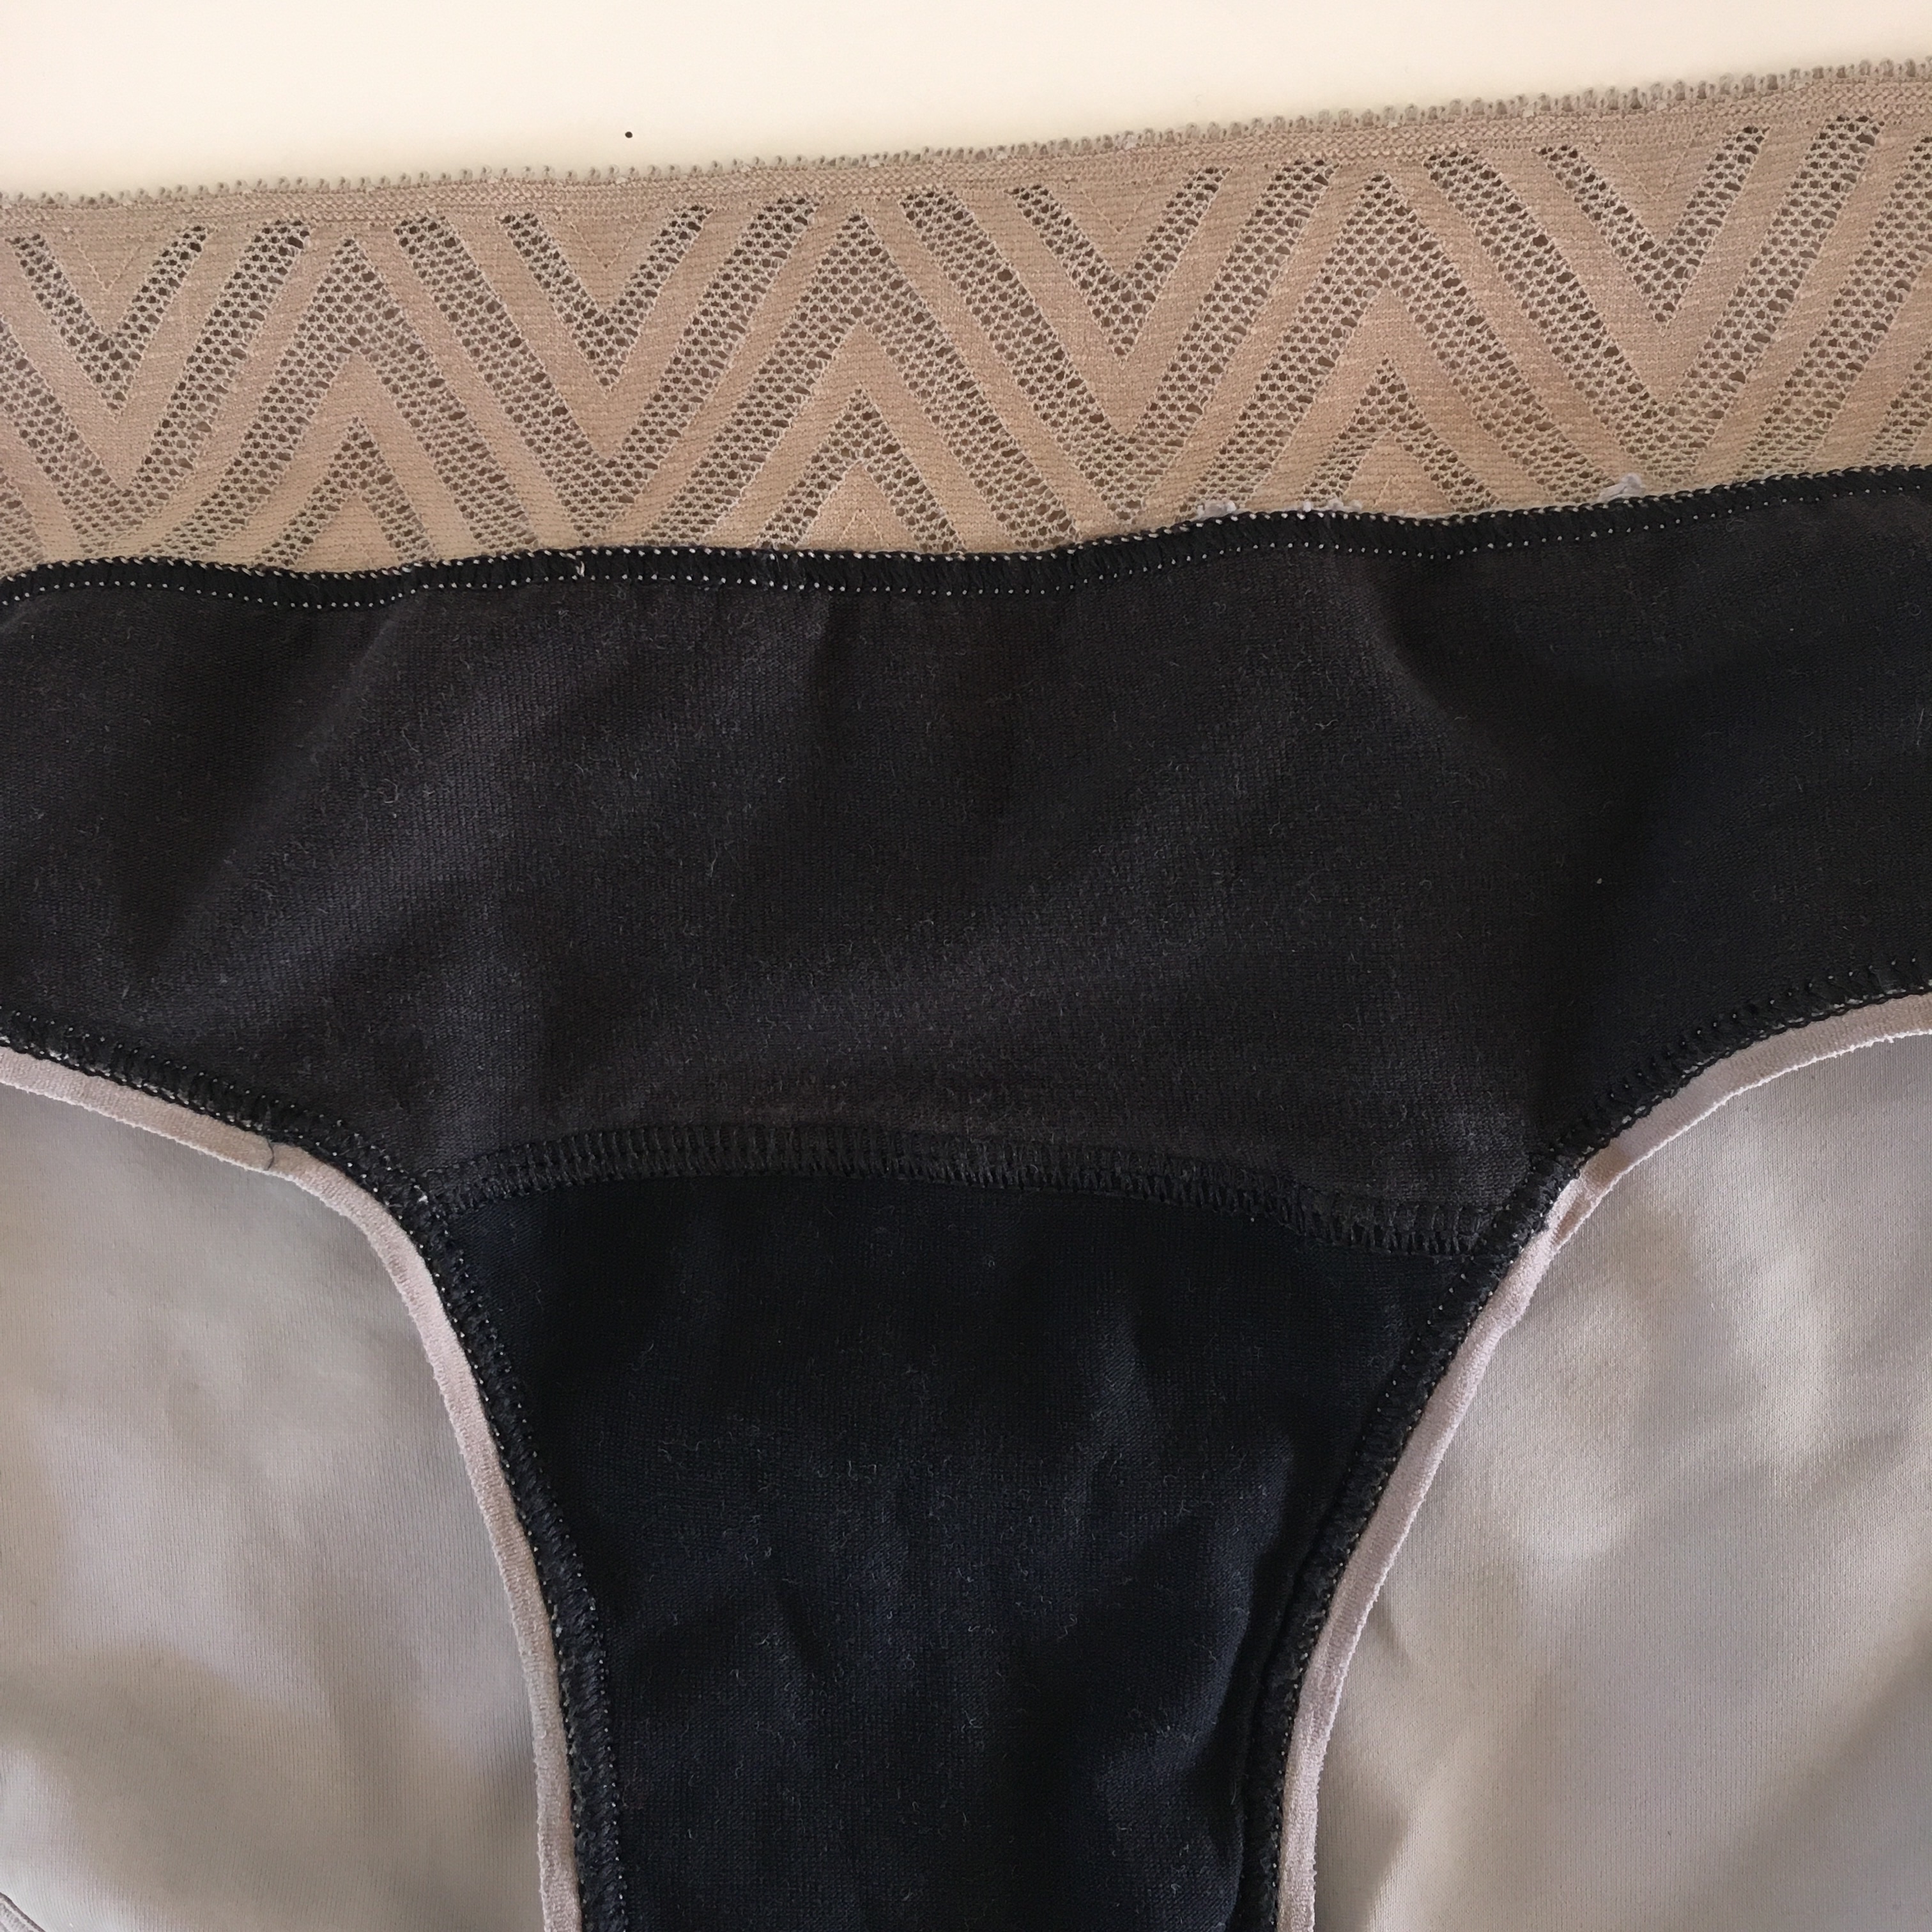 Thinx period pants UK review: We put the eco-friendly underwear to the test